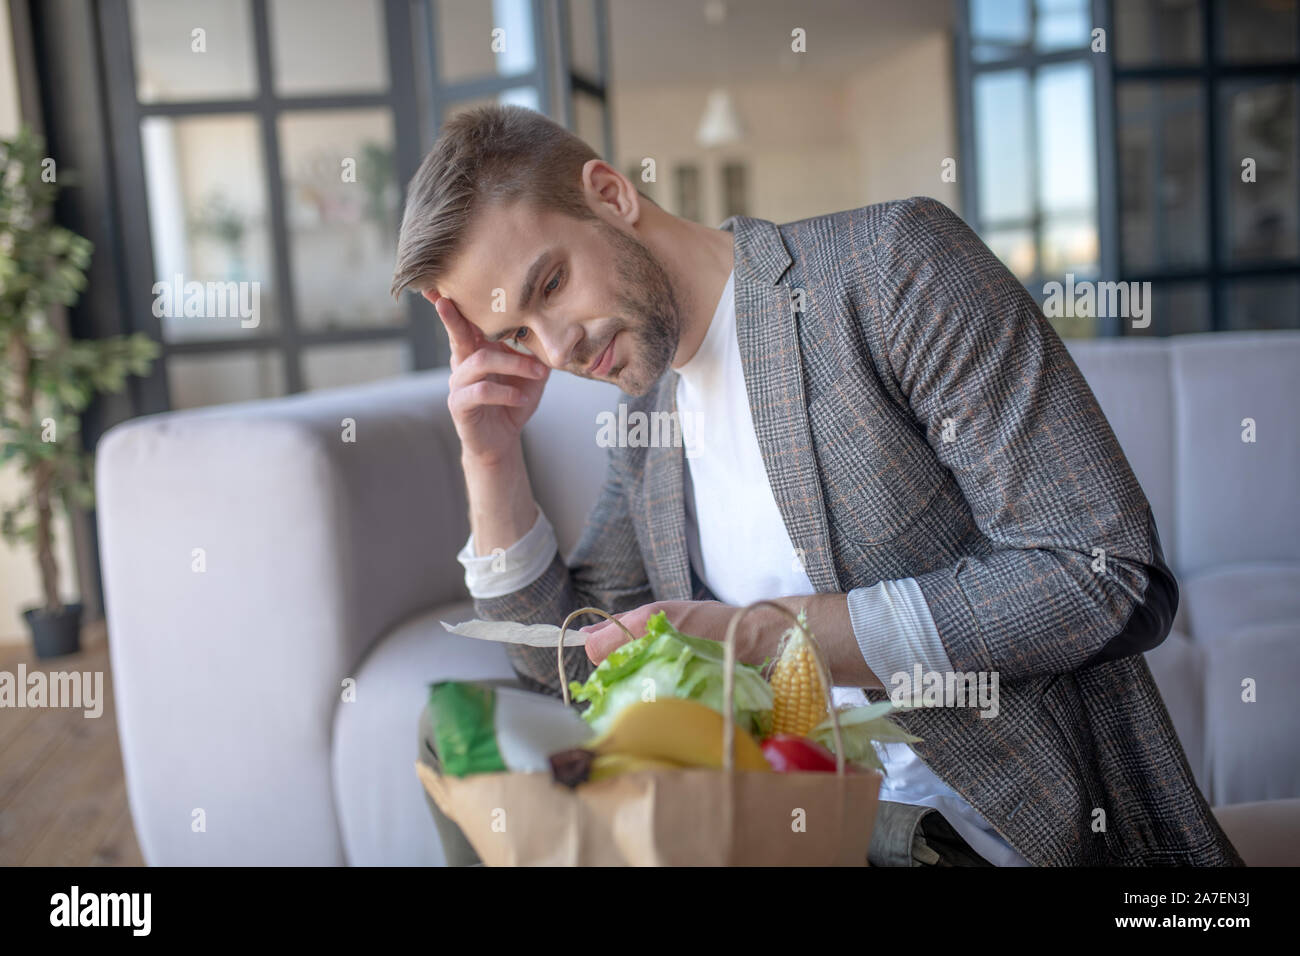 Bearded man looking at receipt and checking prices Stock Photo